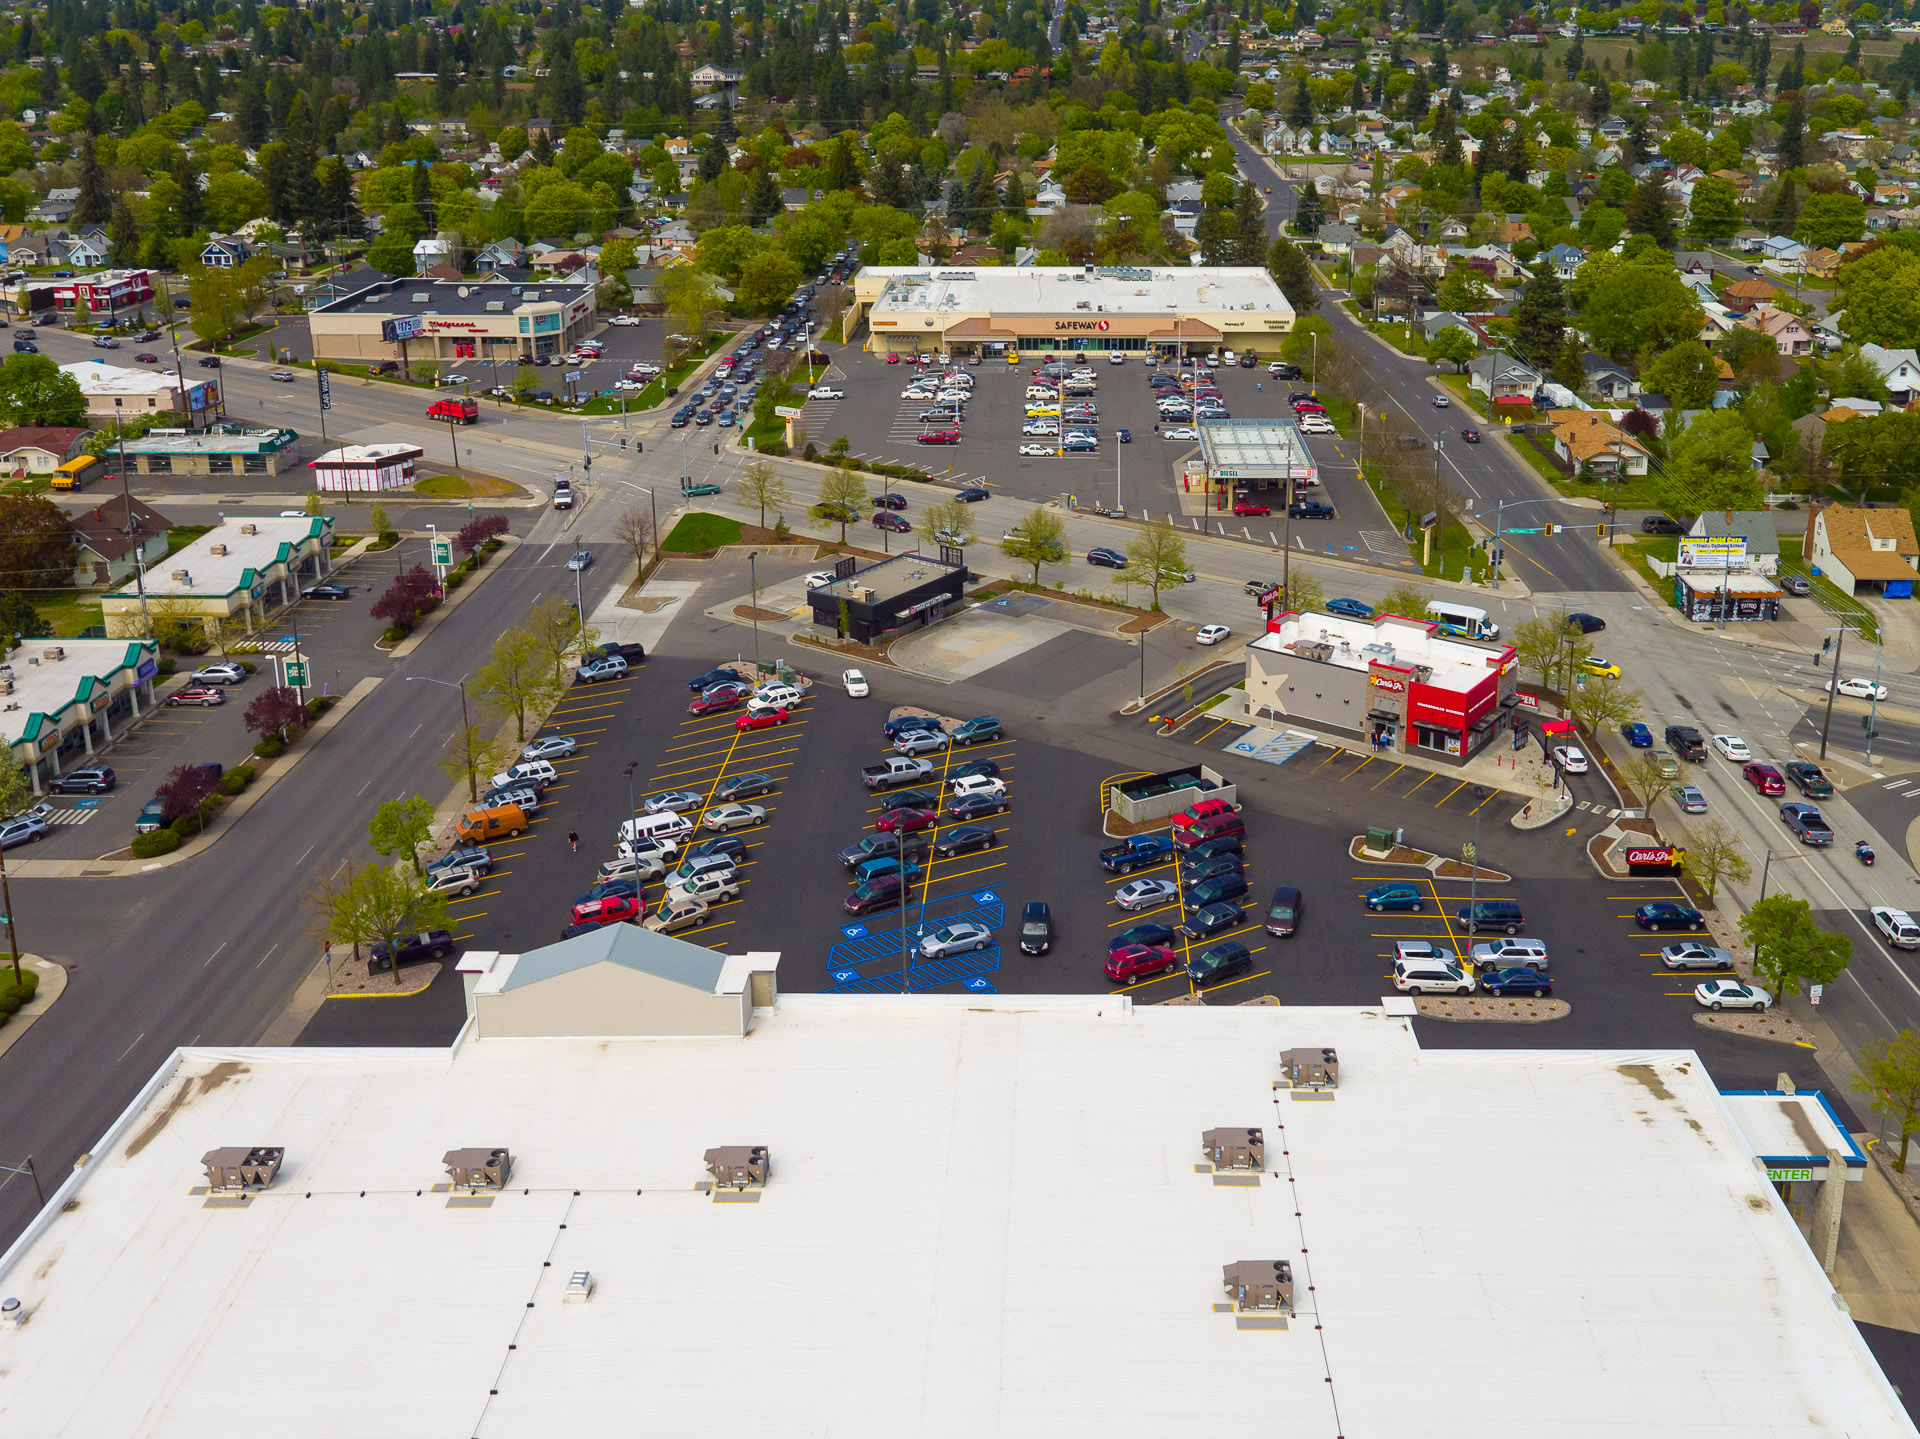 Commercial Drone Photography at Planet Fitness